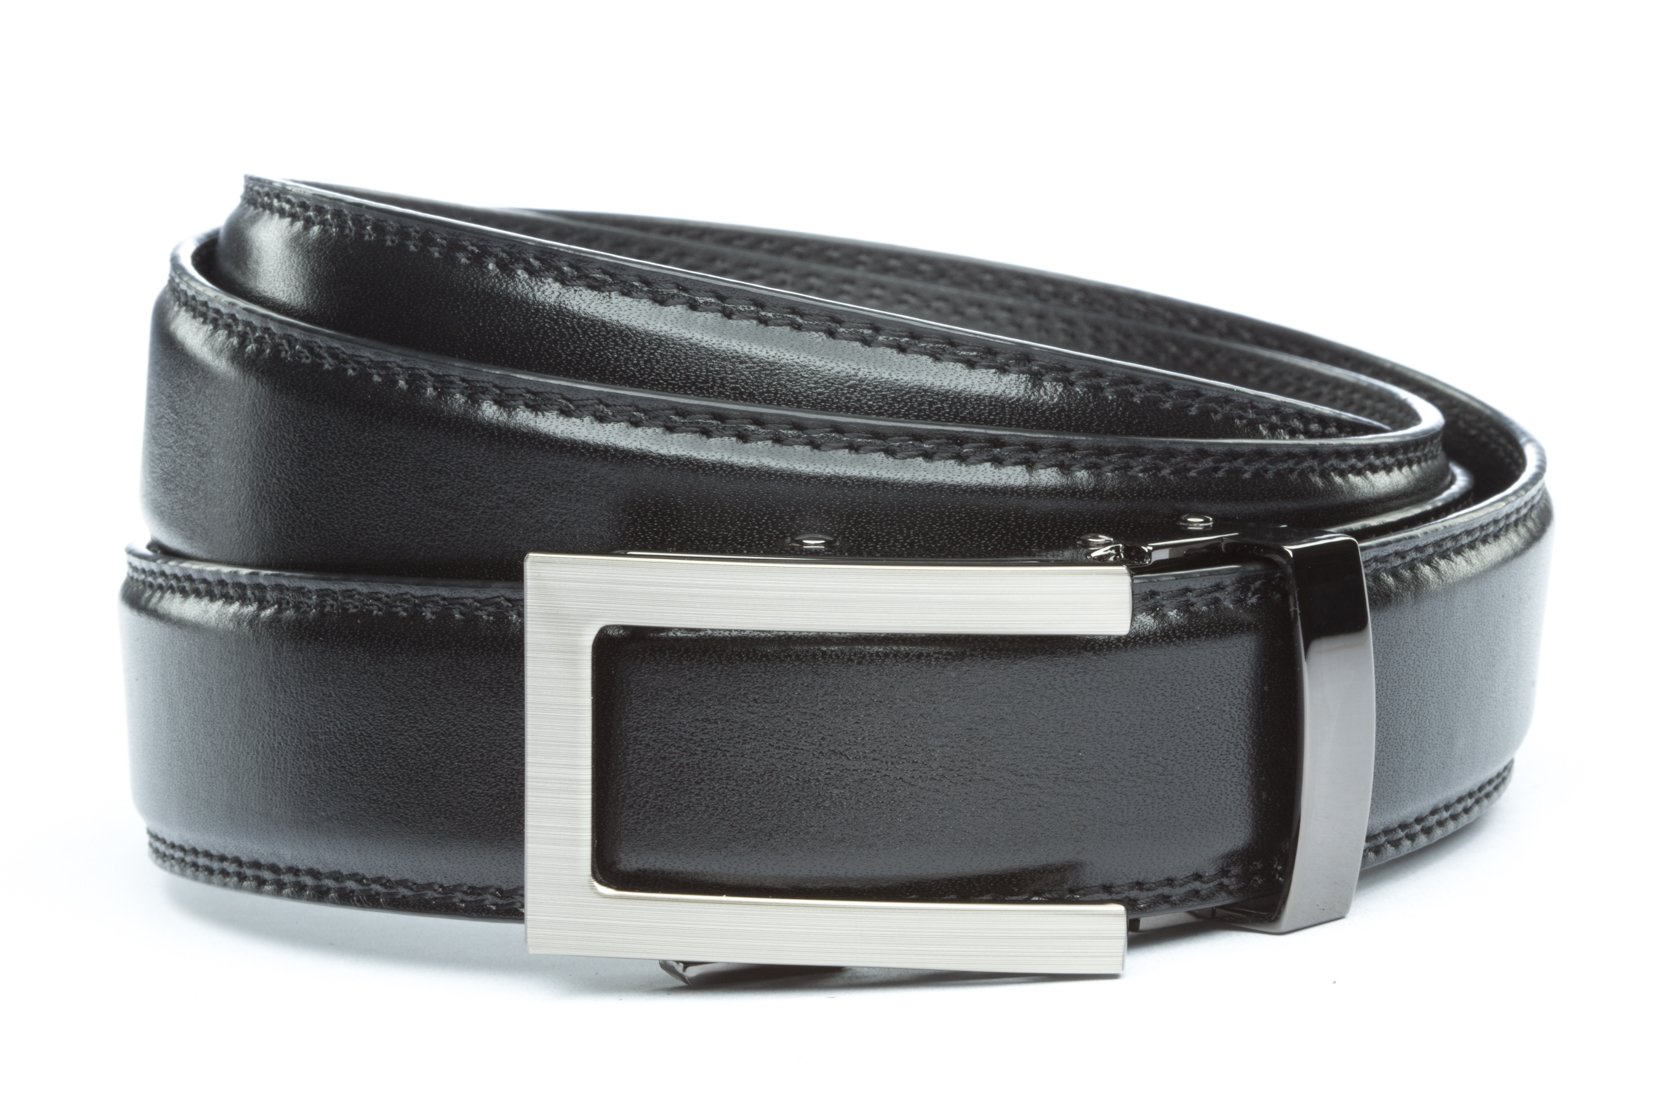 Infinitely Adjustable Mens Belt With No Holes Comfortable Elastic Stretch Fit Casual Or 1.5 WIDE Business Dress 